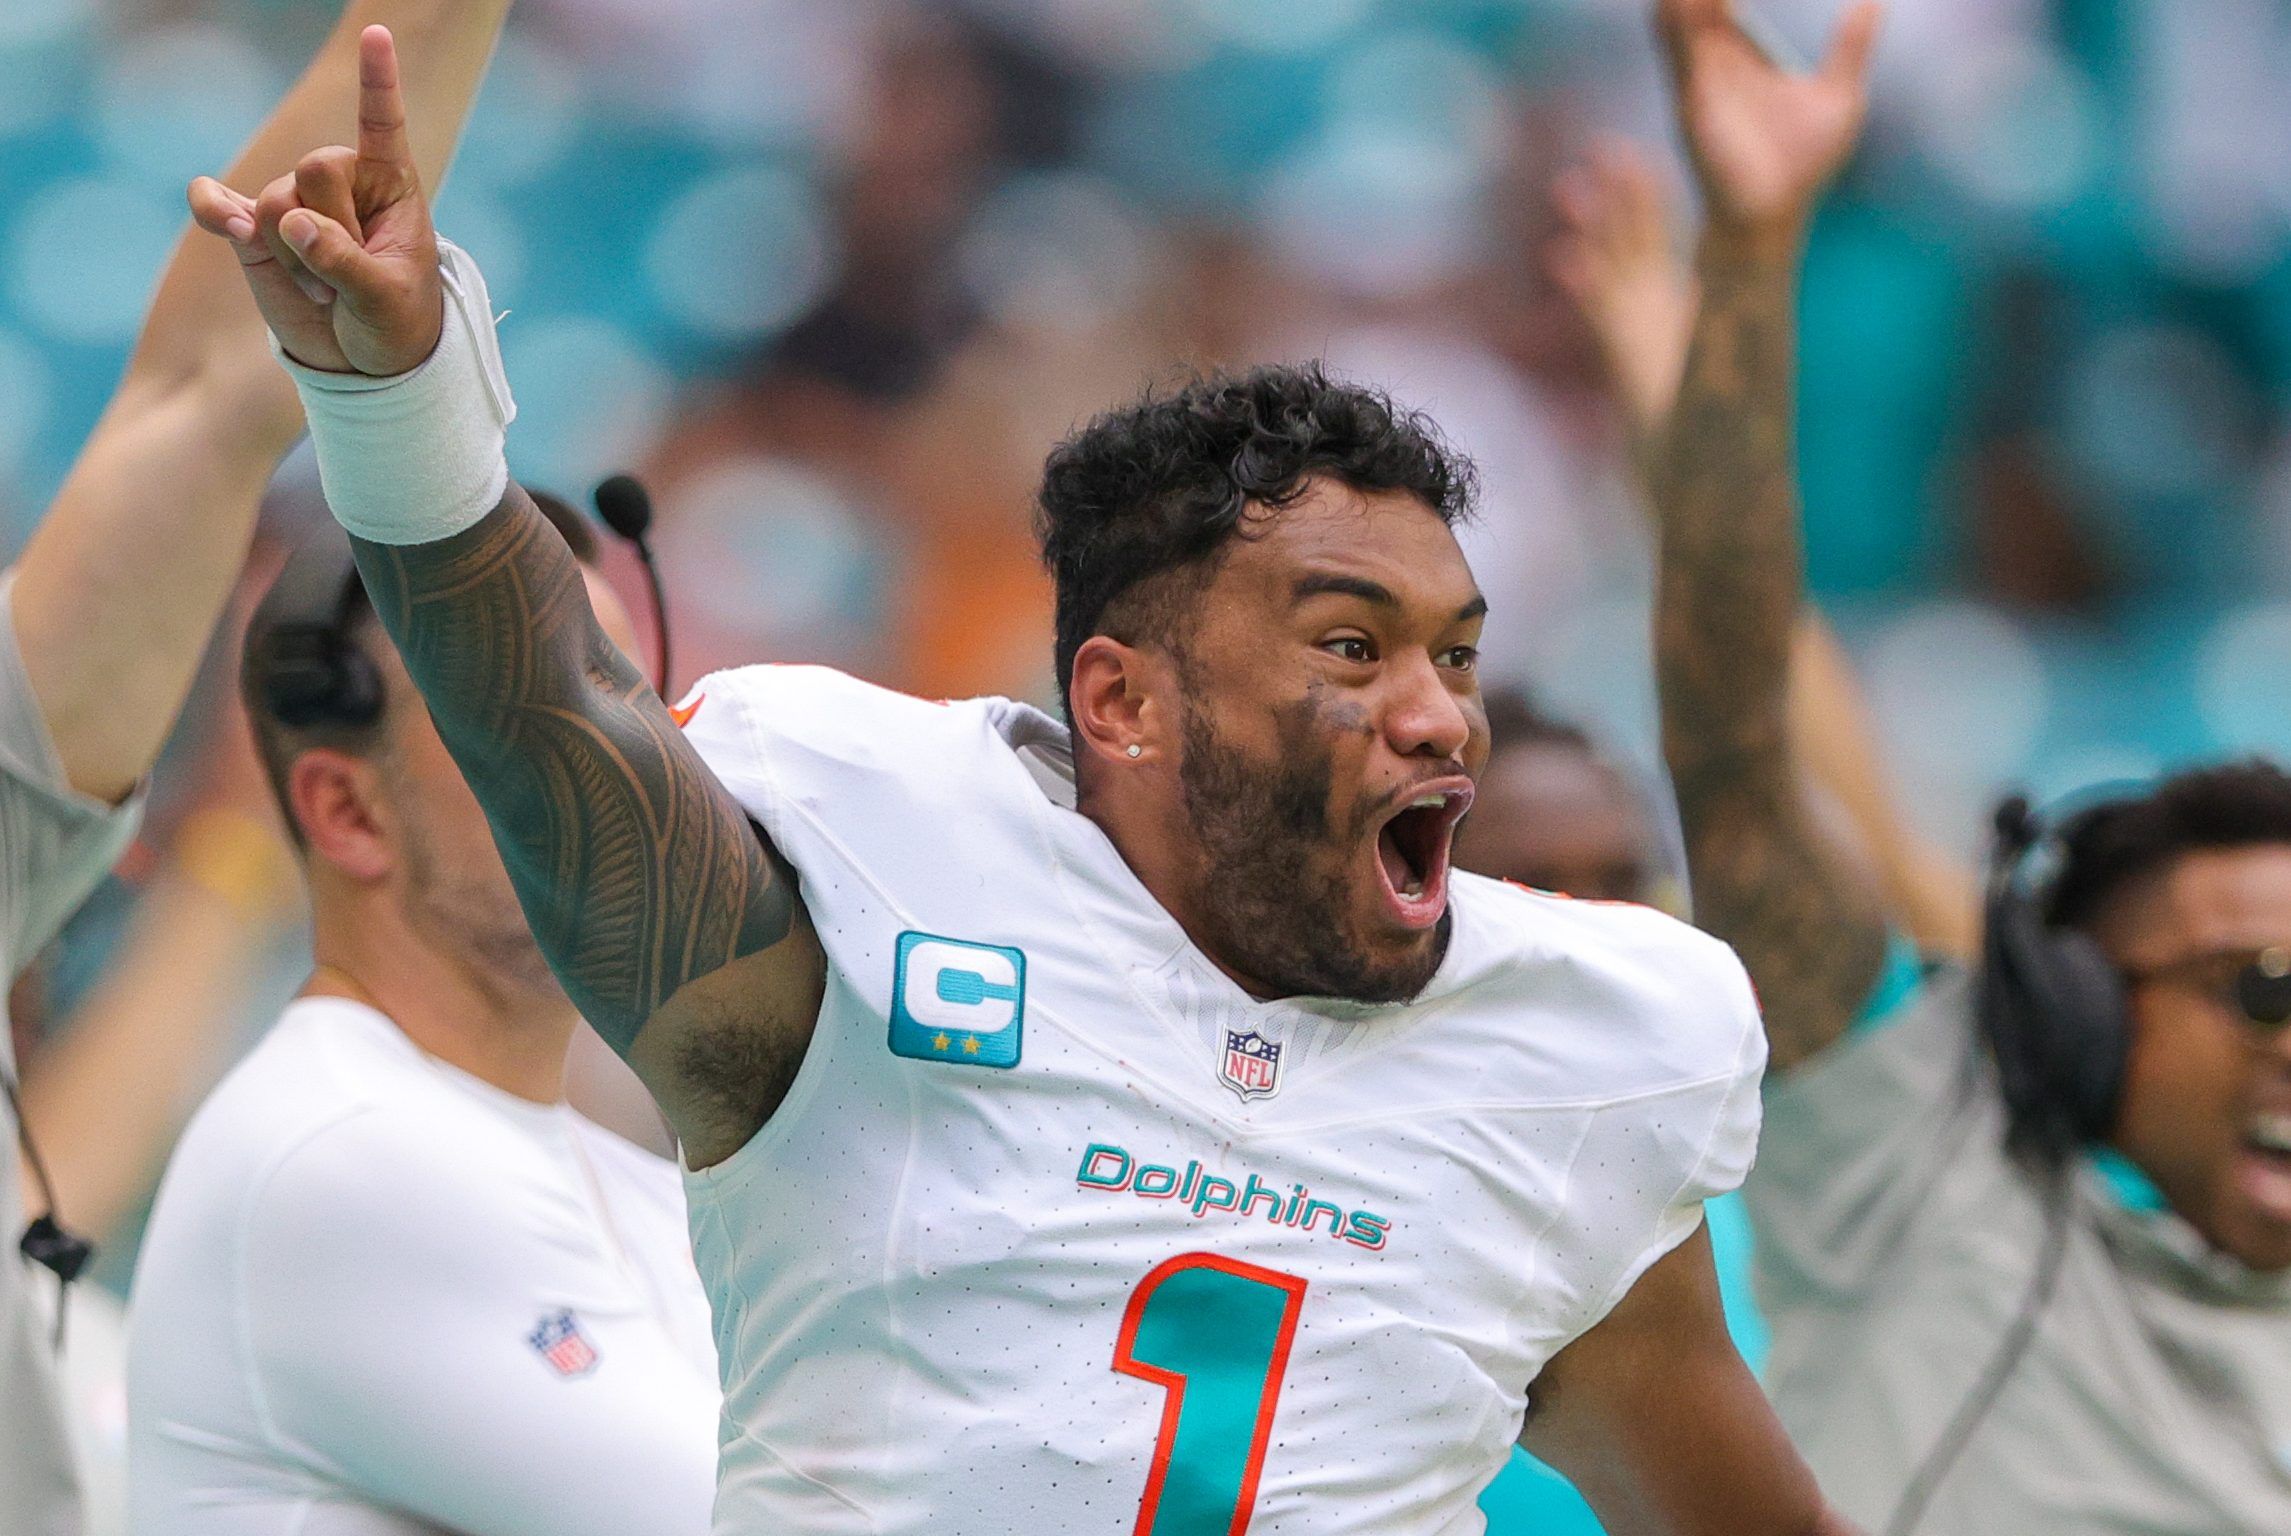 Dolphins need to address defensive issues amid 2-game skid